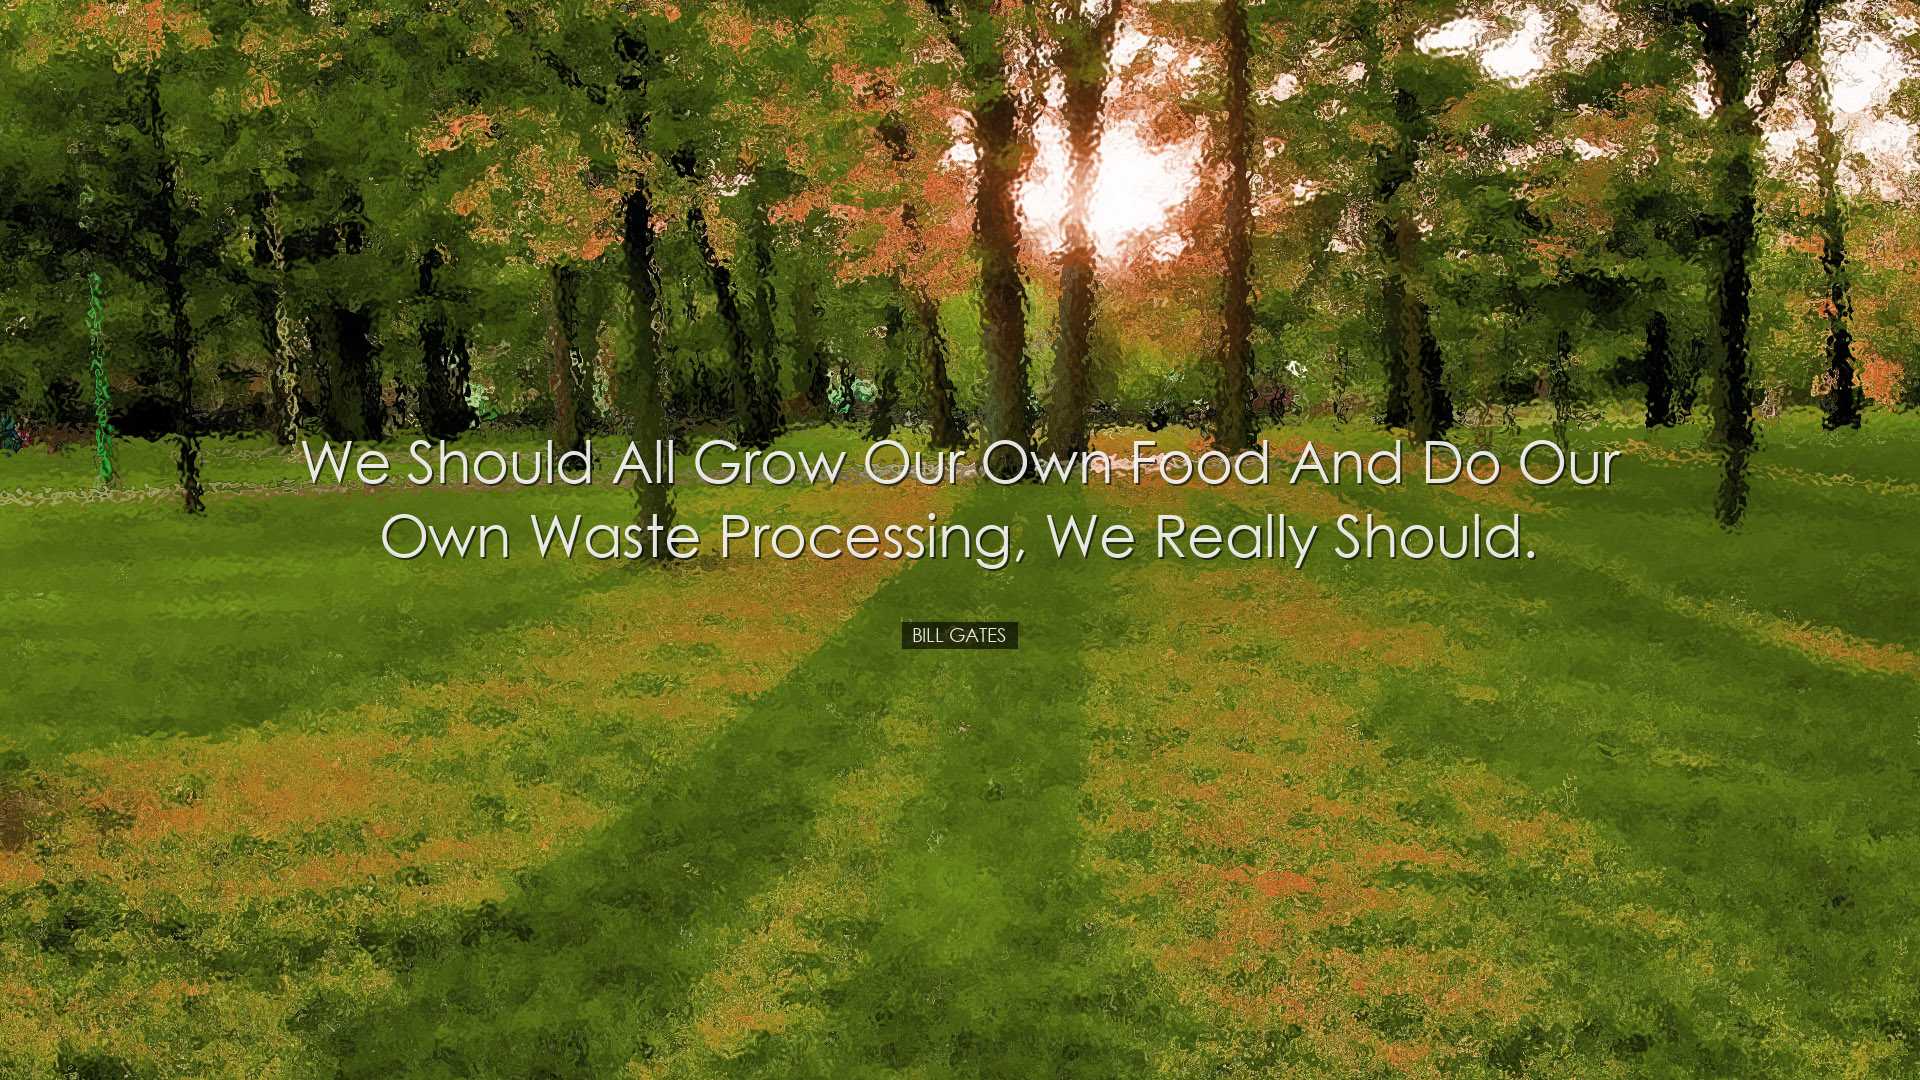 We should all grow our own food and do our own waste processing, w